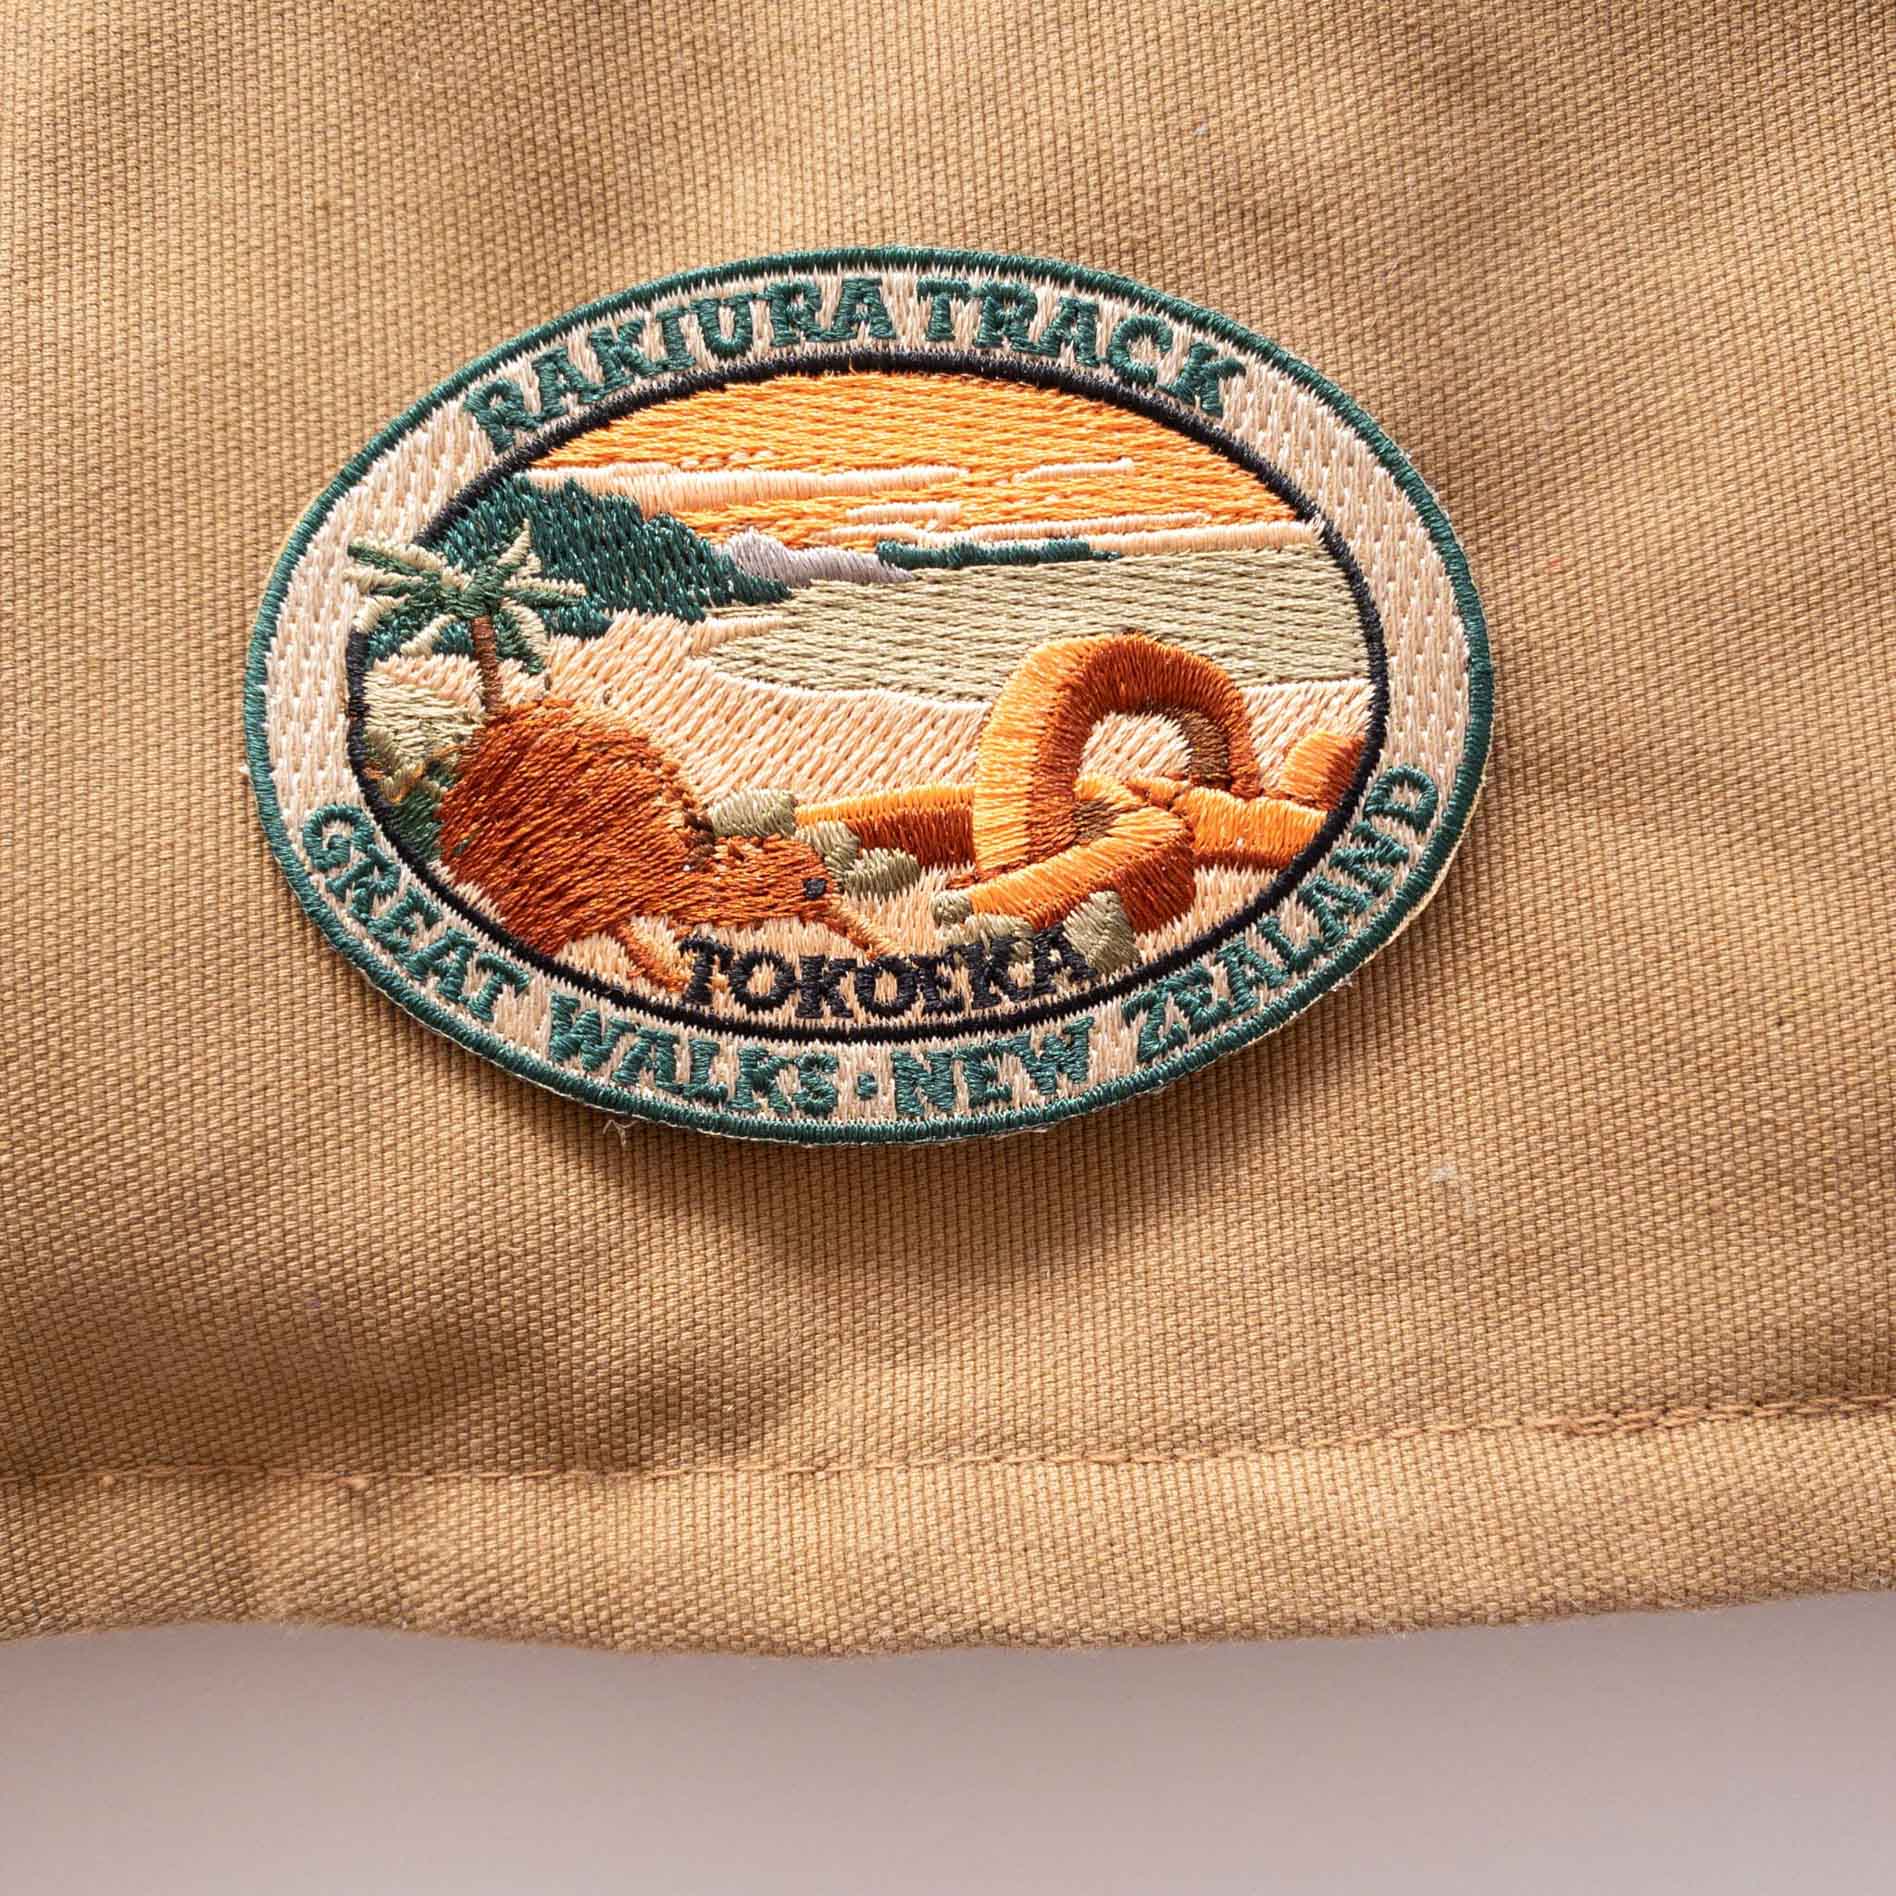 Oval, embroidered Rakiura Track patch, with a brown kiwi, orange sky, and a chain link sculpture, on a brown canvas bag.